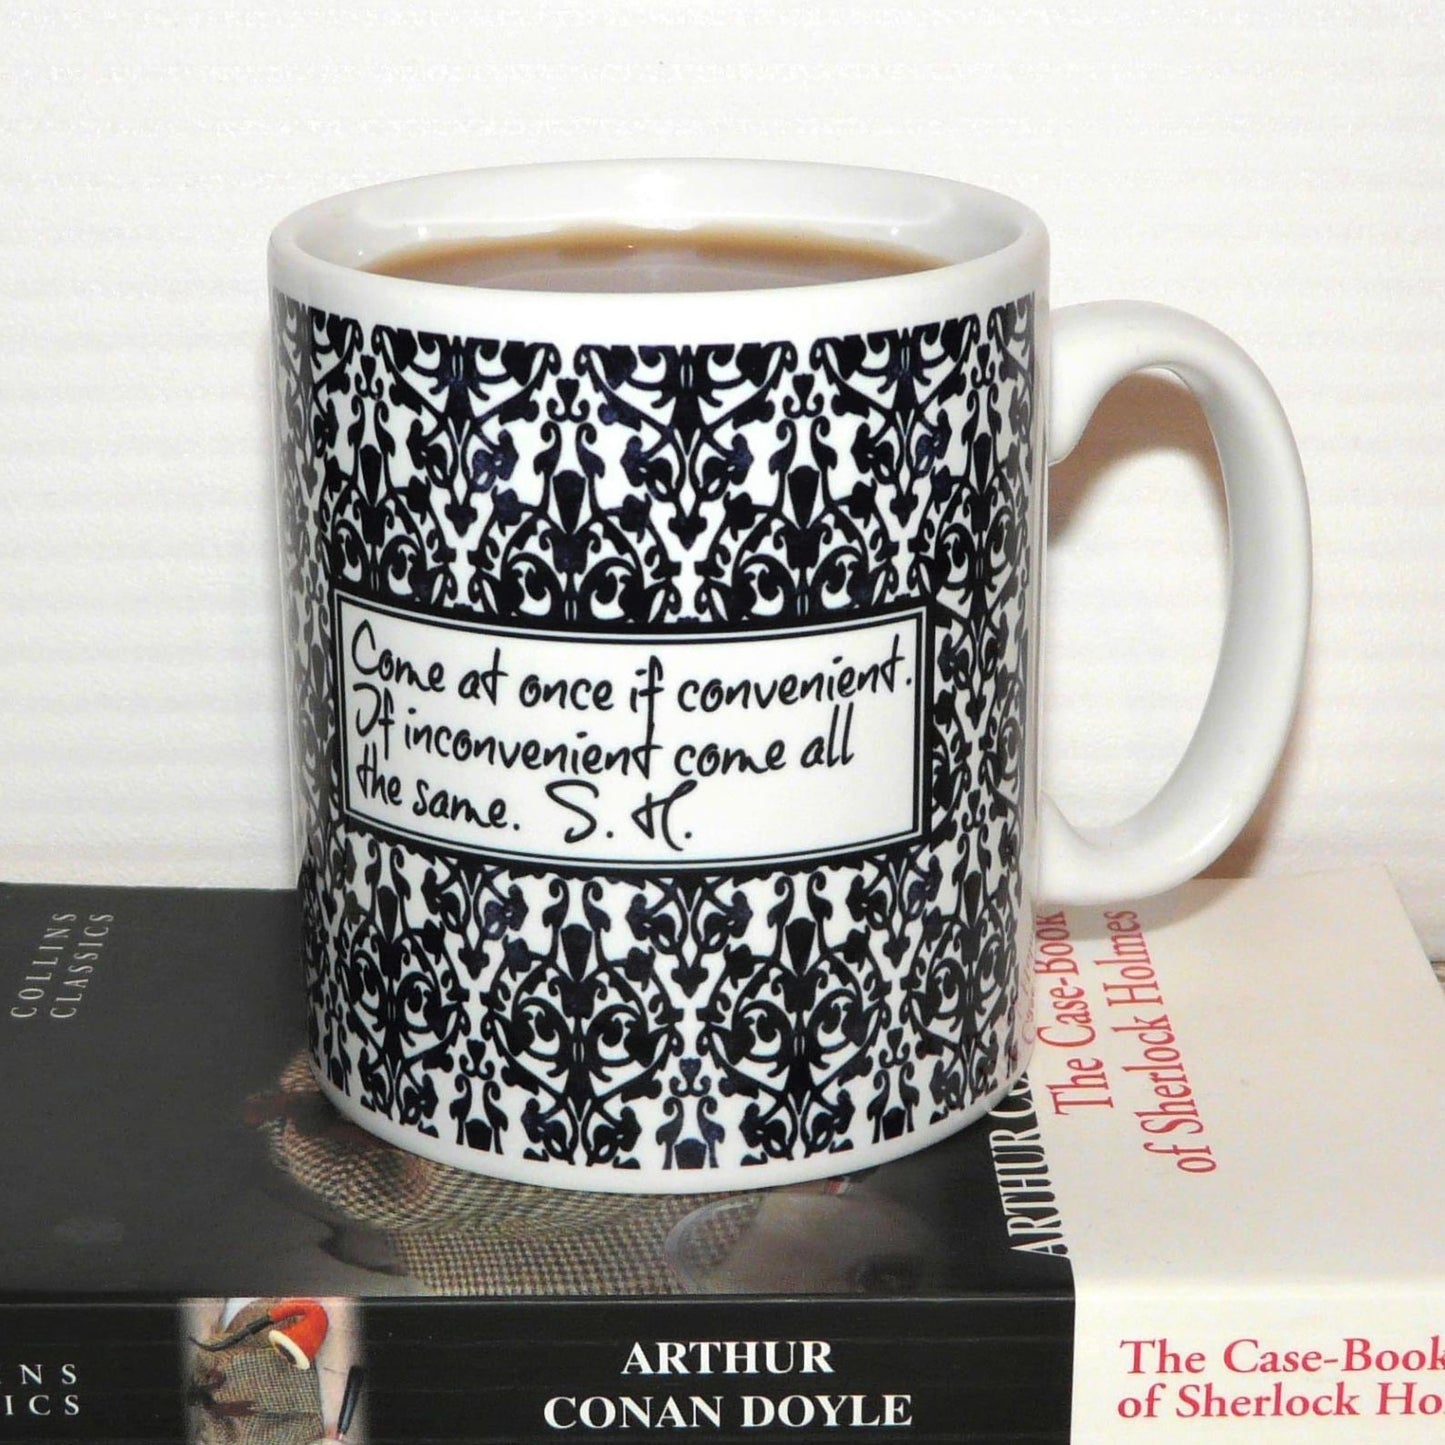 Mug - Sherlock - "Come at once if convenient..."